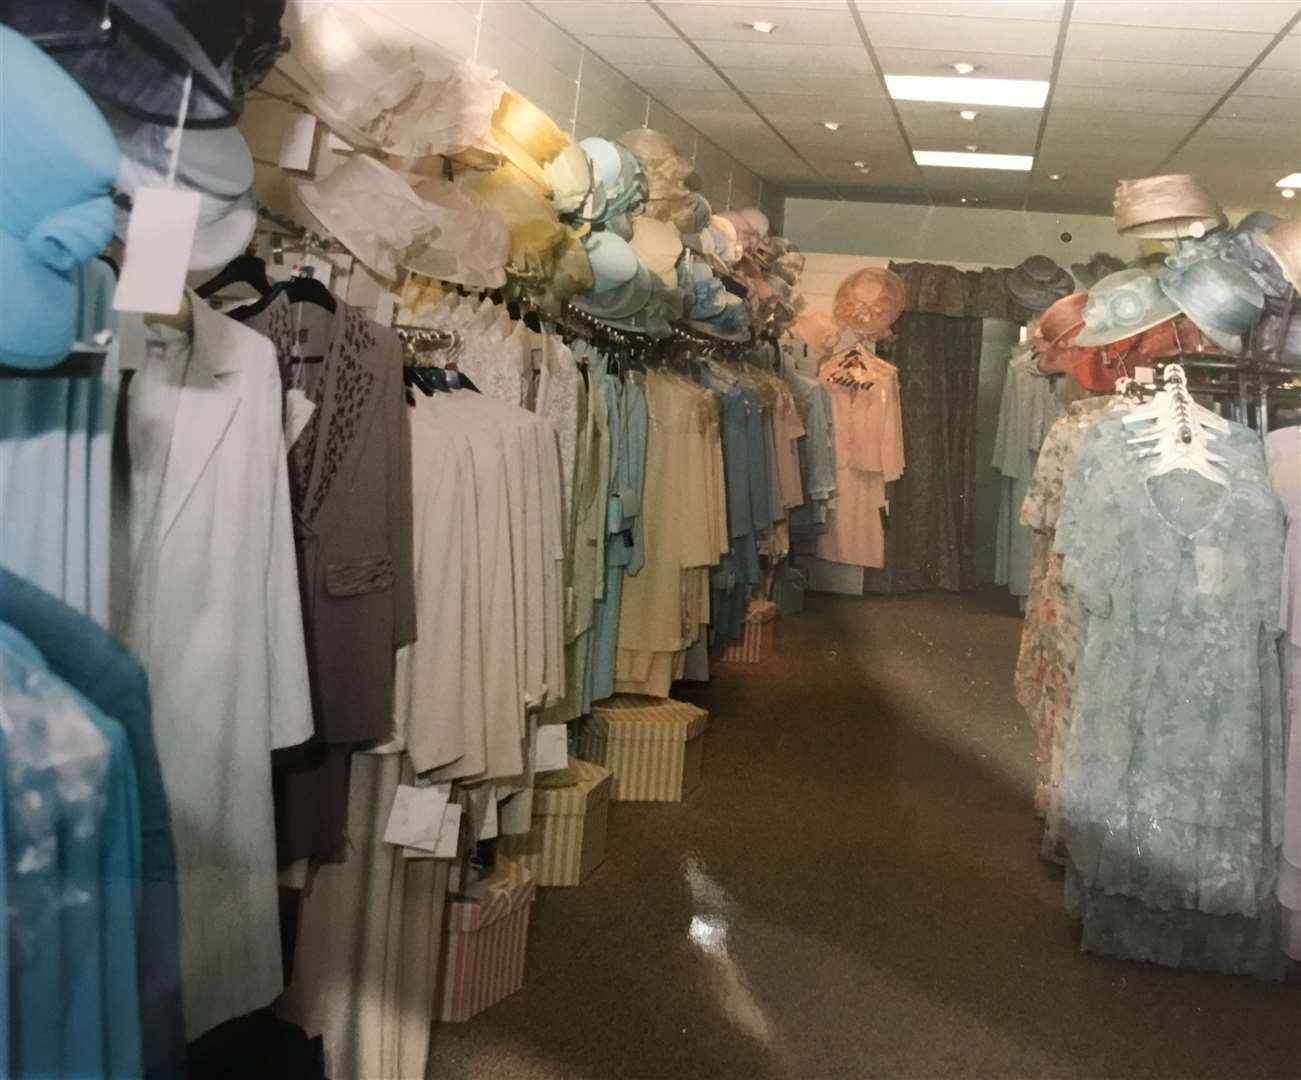 Clothing on display at the popular wedding outfit shop. Picture: Maura Thomas